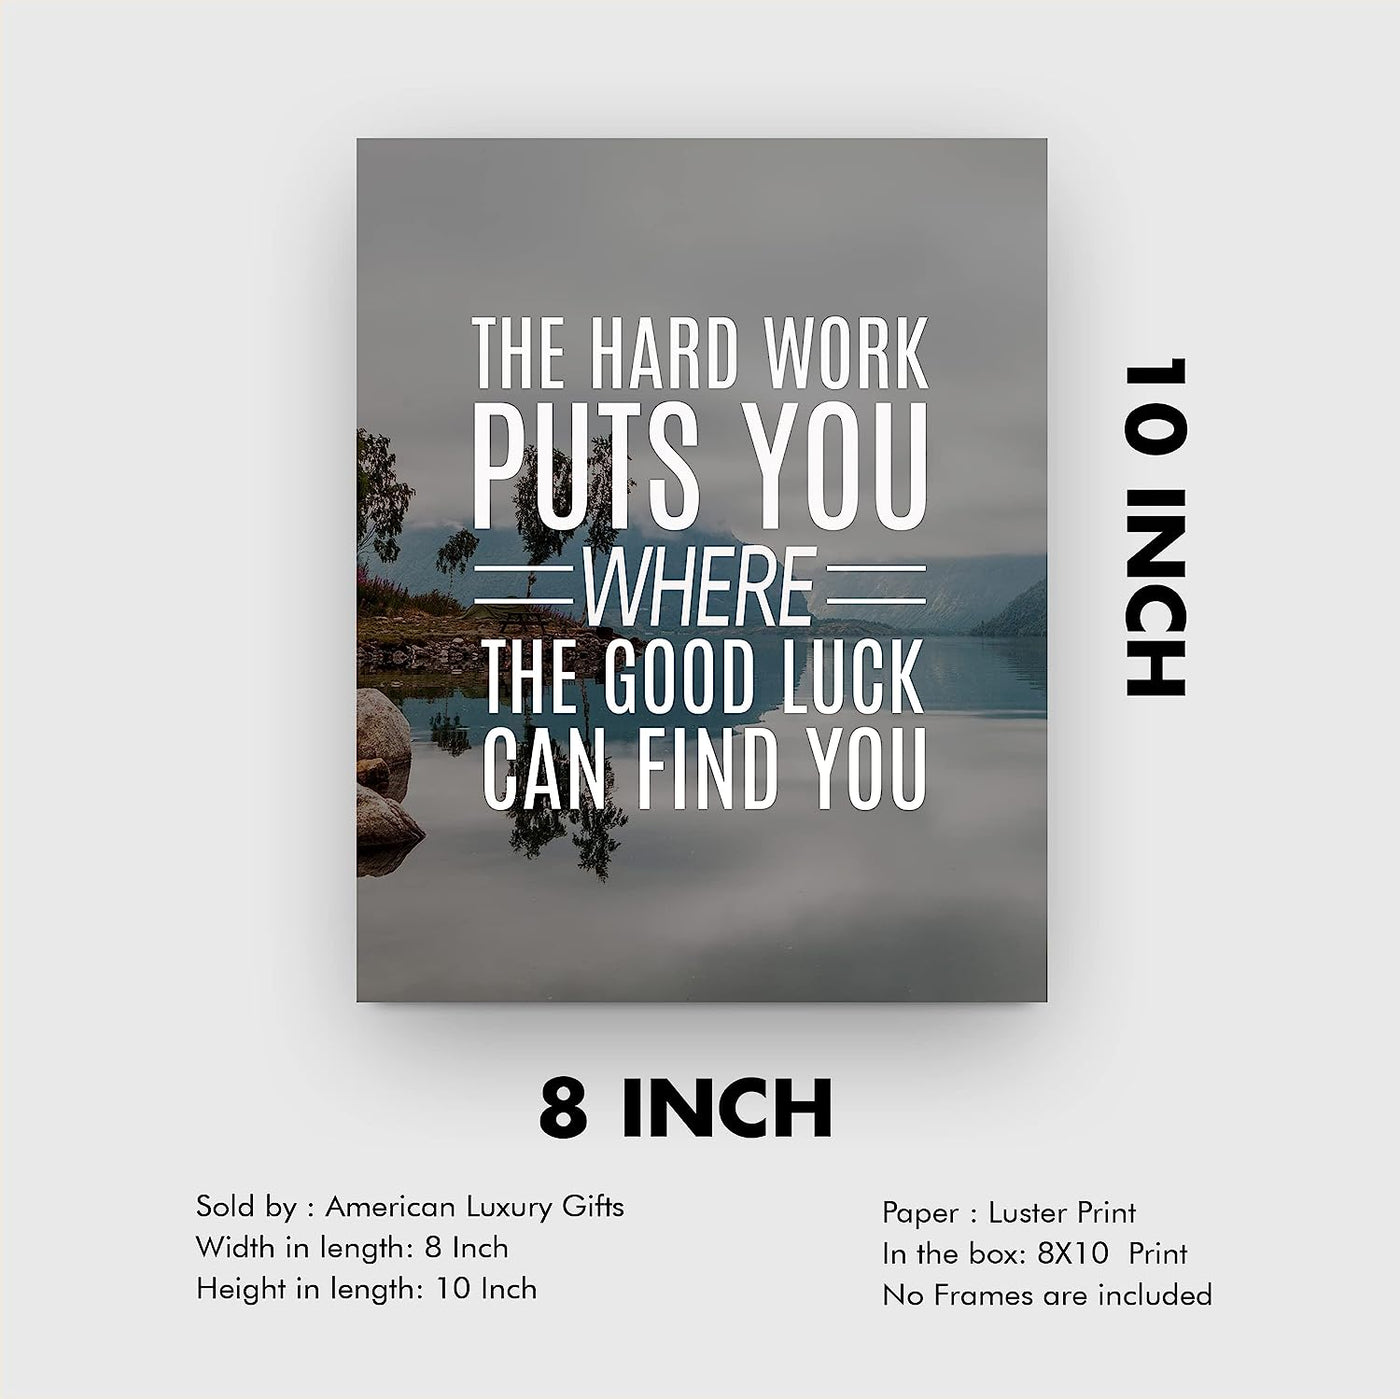 Hard Work Puts You Where Good Luck Finds You- Life Quotes Wall Art- 8 x 10" Modern Poster Print- Ready To Frame. Inspirational Home-Office-School Decor. Perfect Motivational Gift for Students!